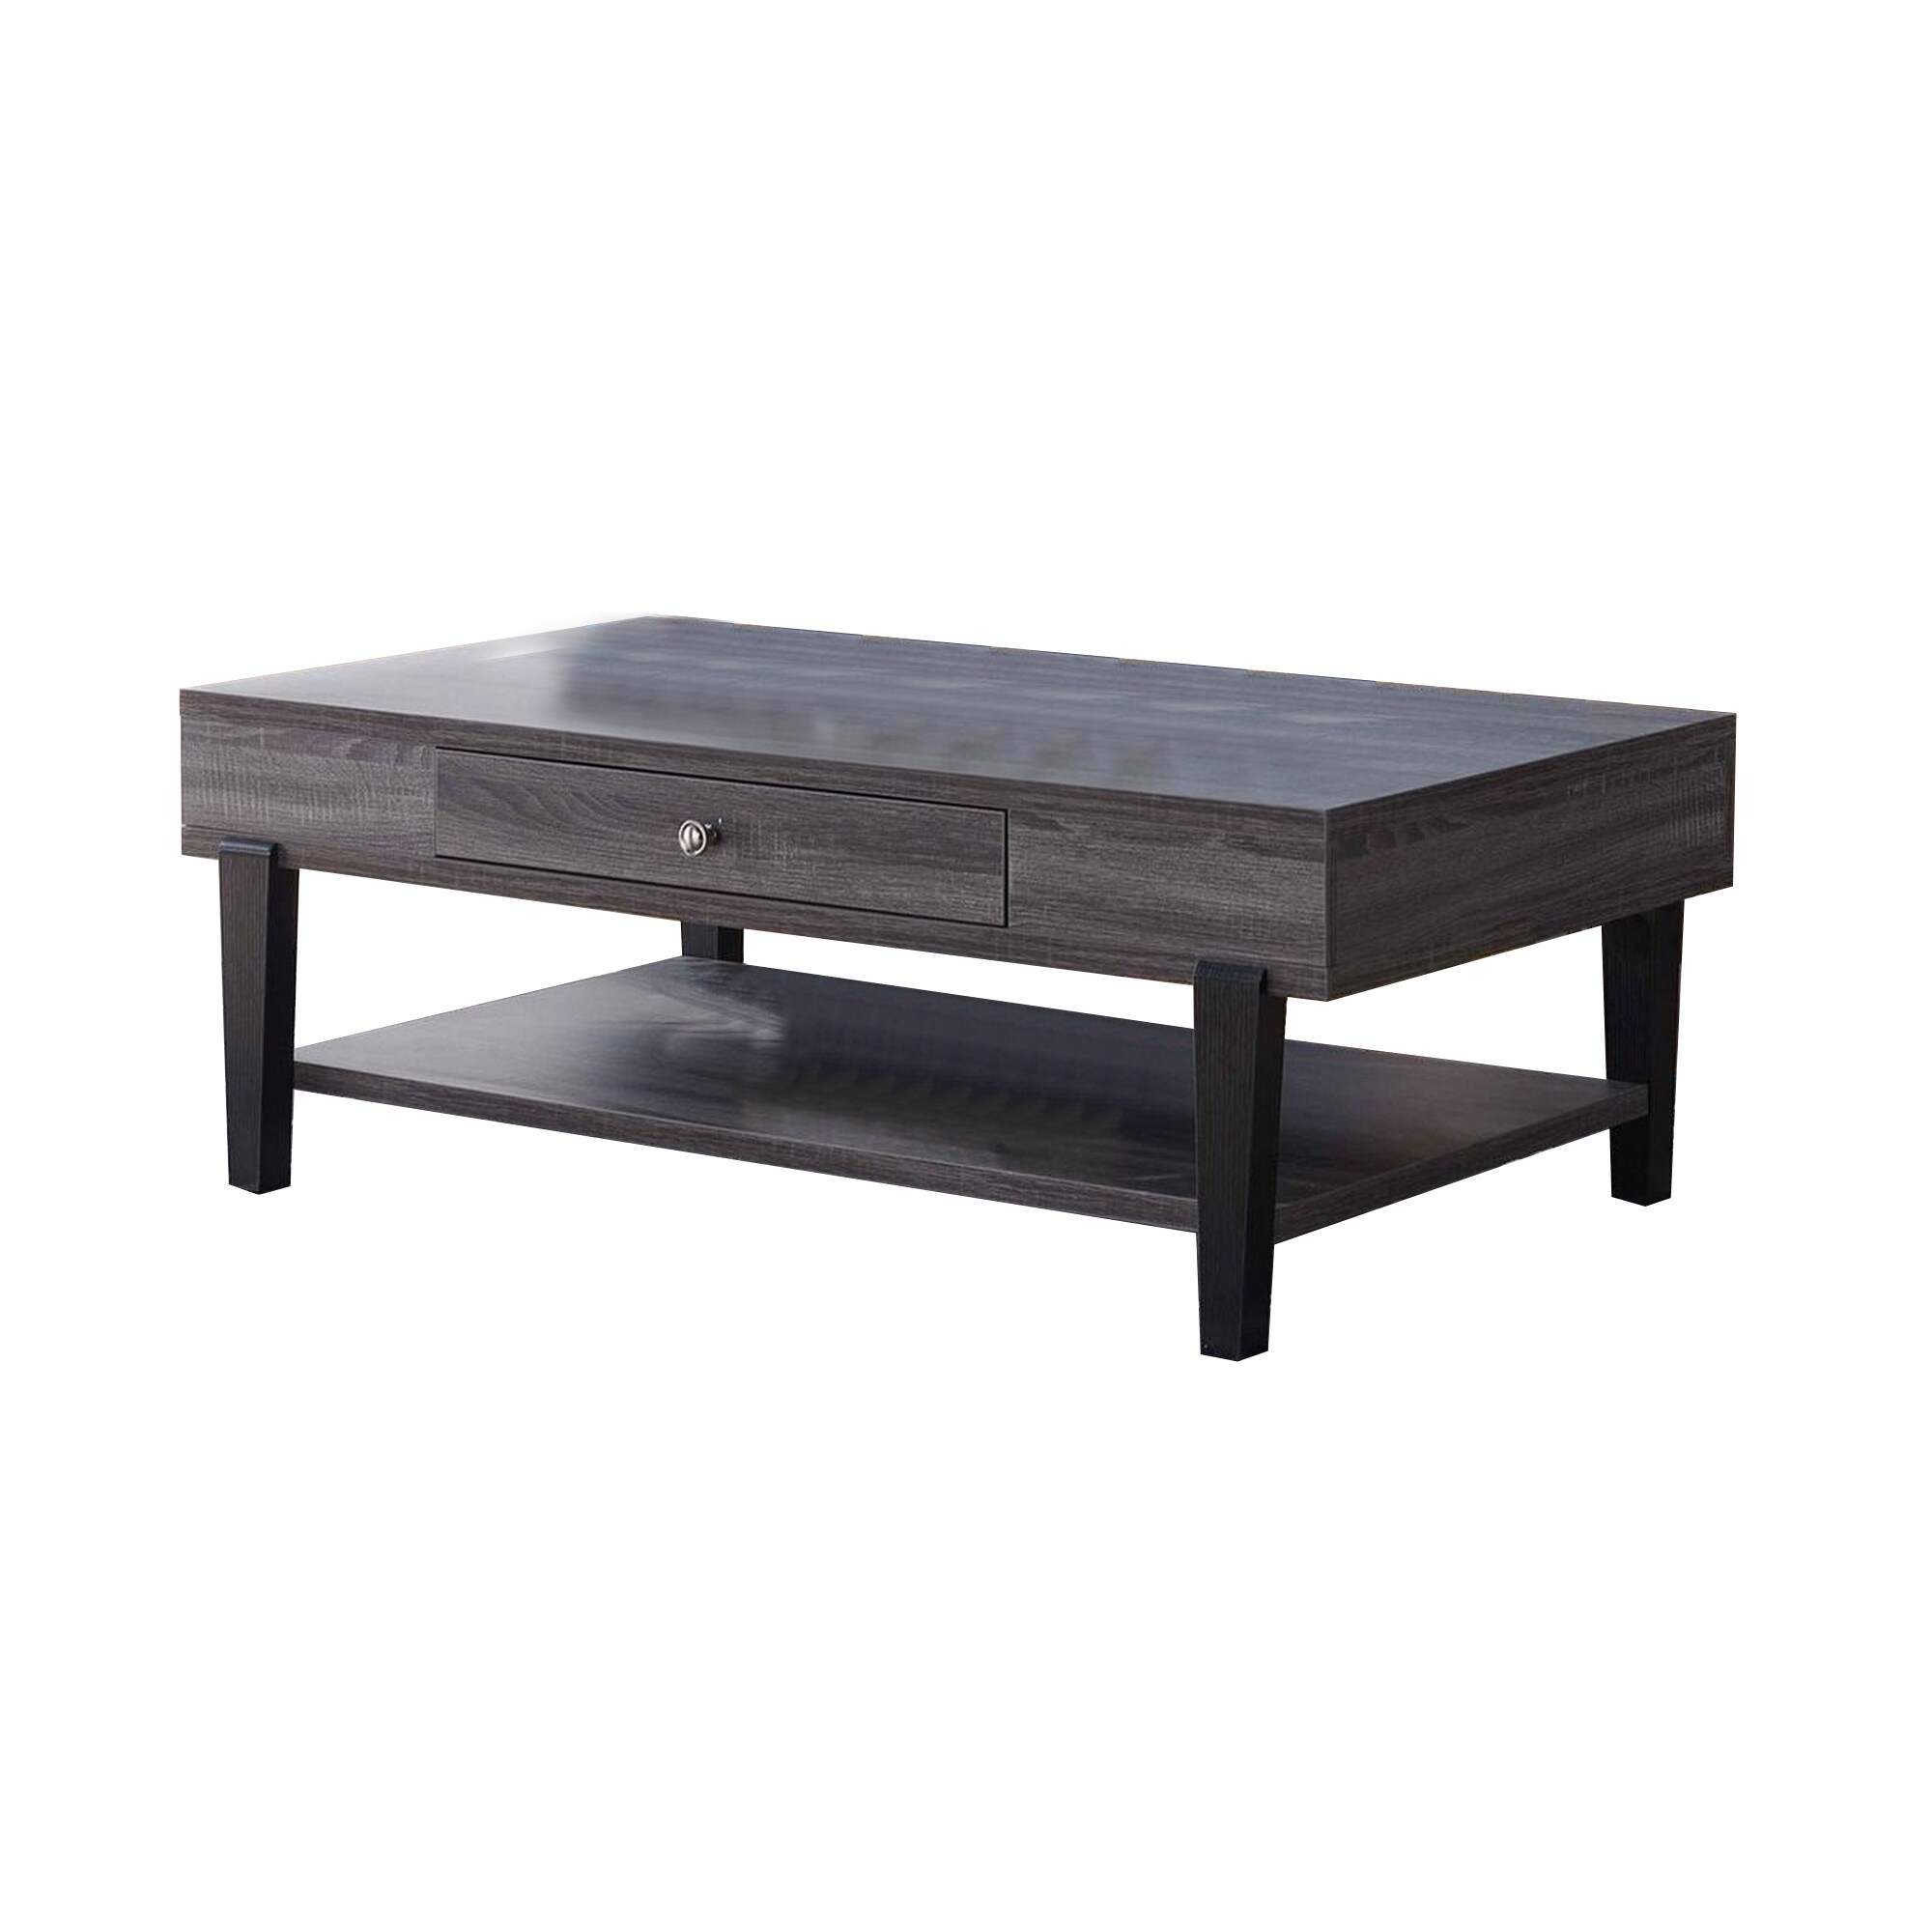 1 Drawer Wooden Coffee Table with 1 Open Shelf, Distressed Gray